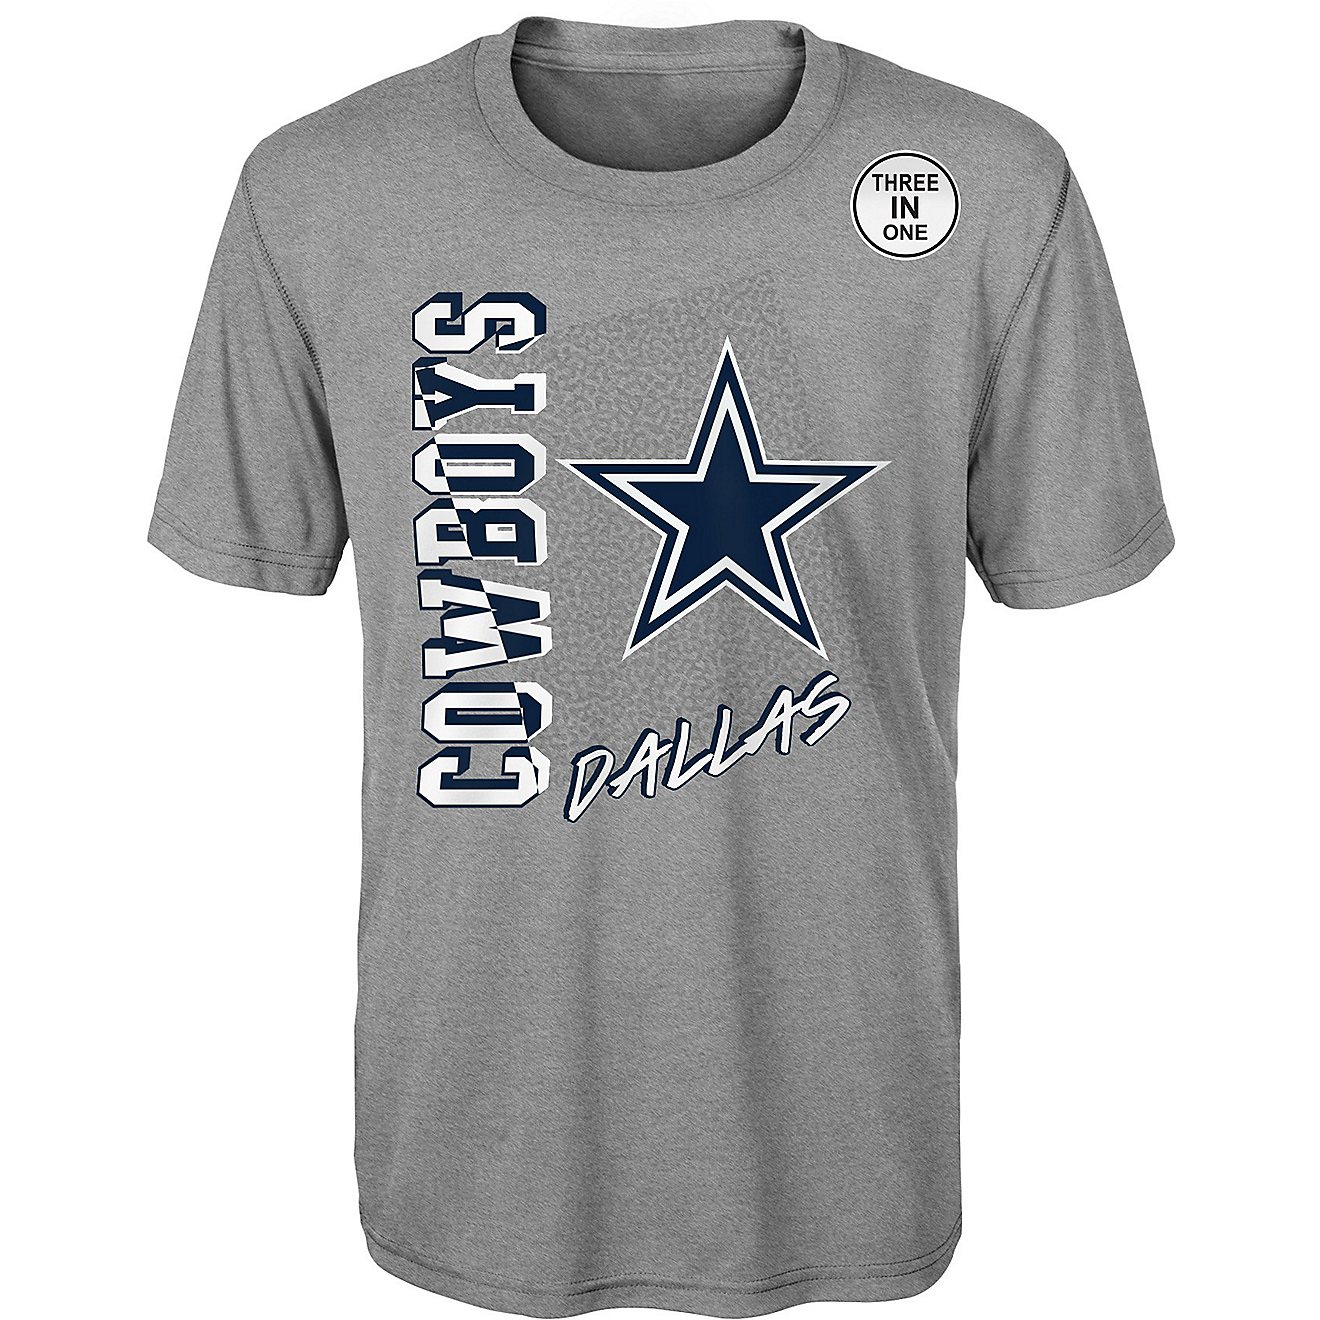 Outerstuff Toddler Boys' Dallas Cowboys 3-in-1 T-shirt Set                                                                       - view number 3